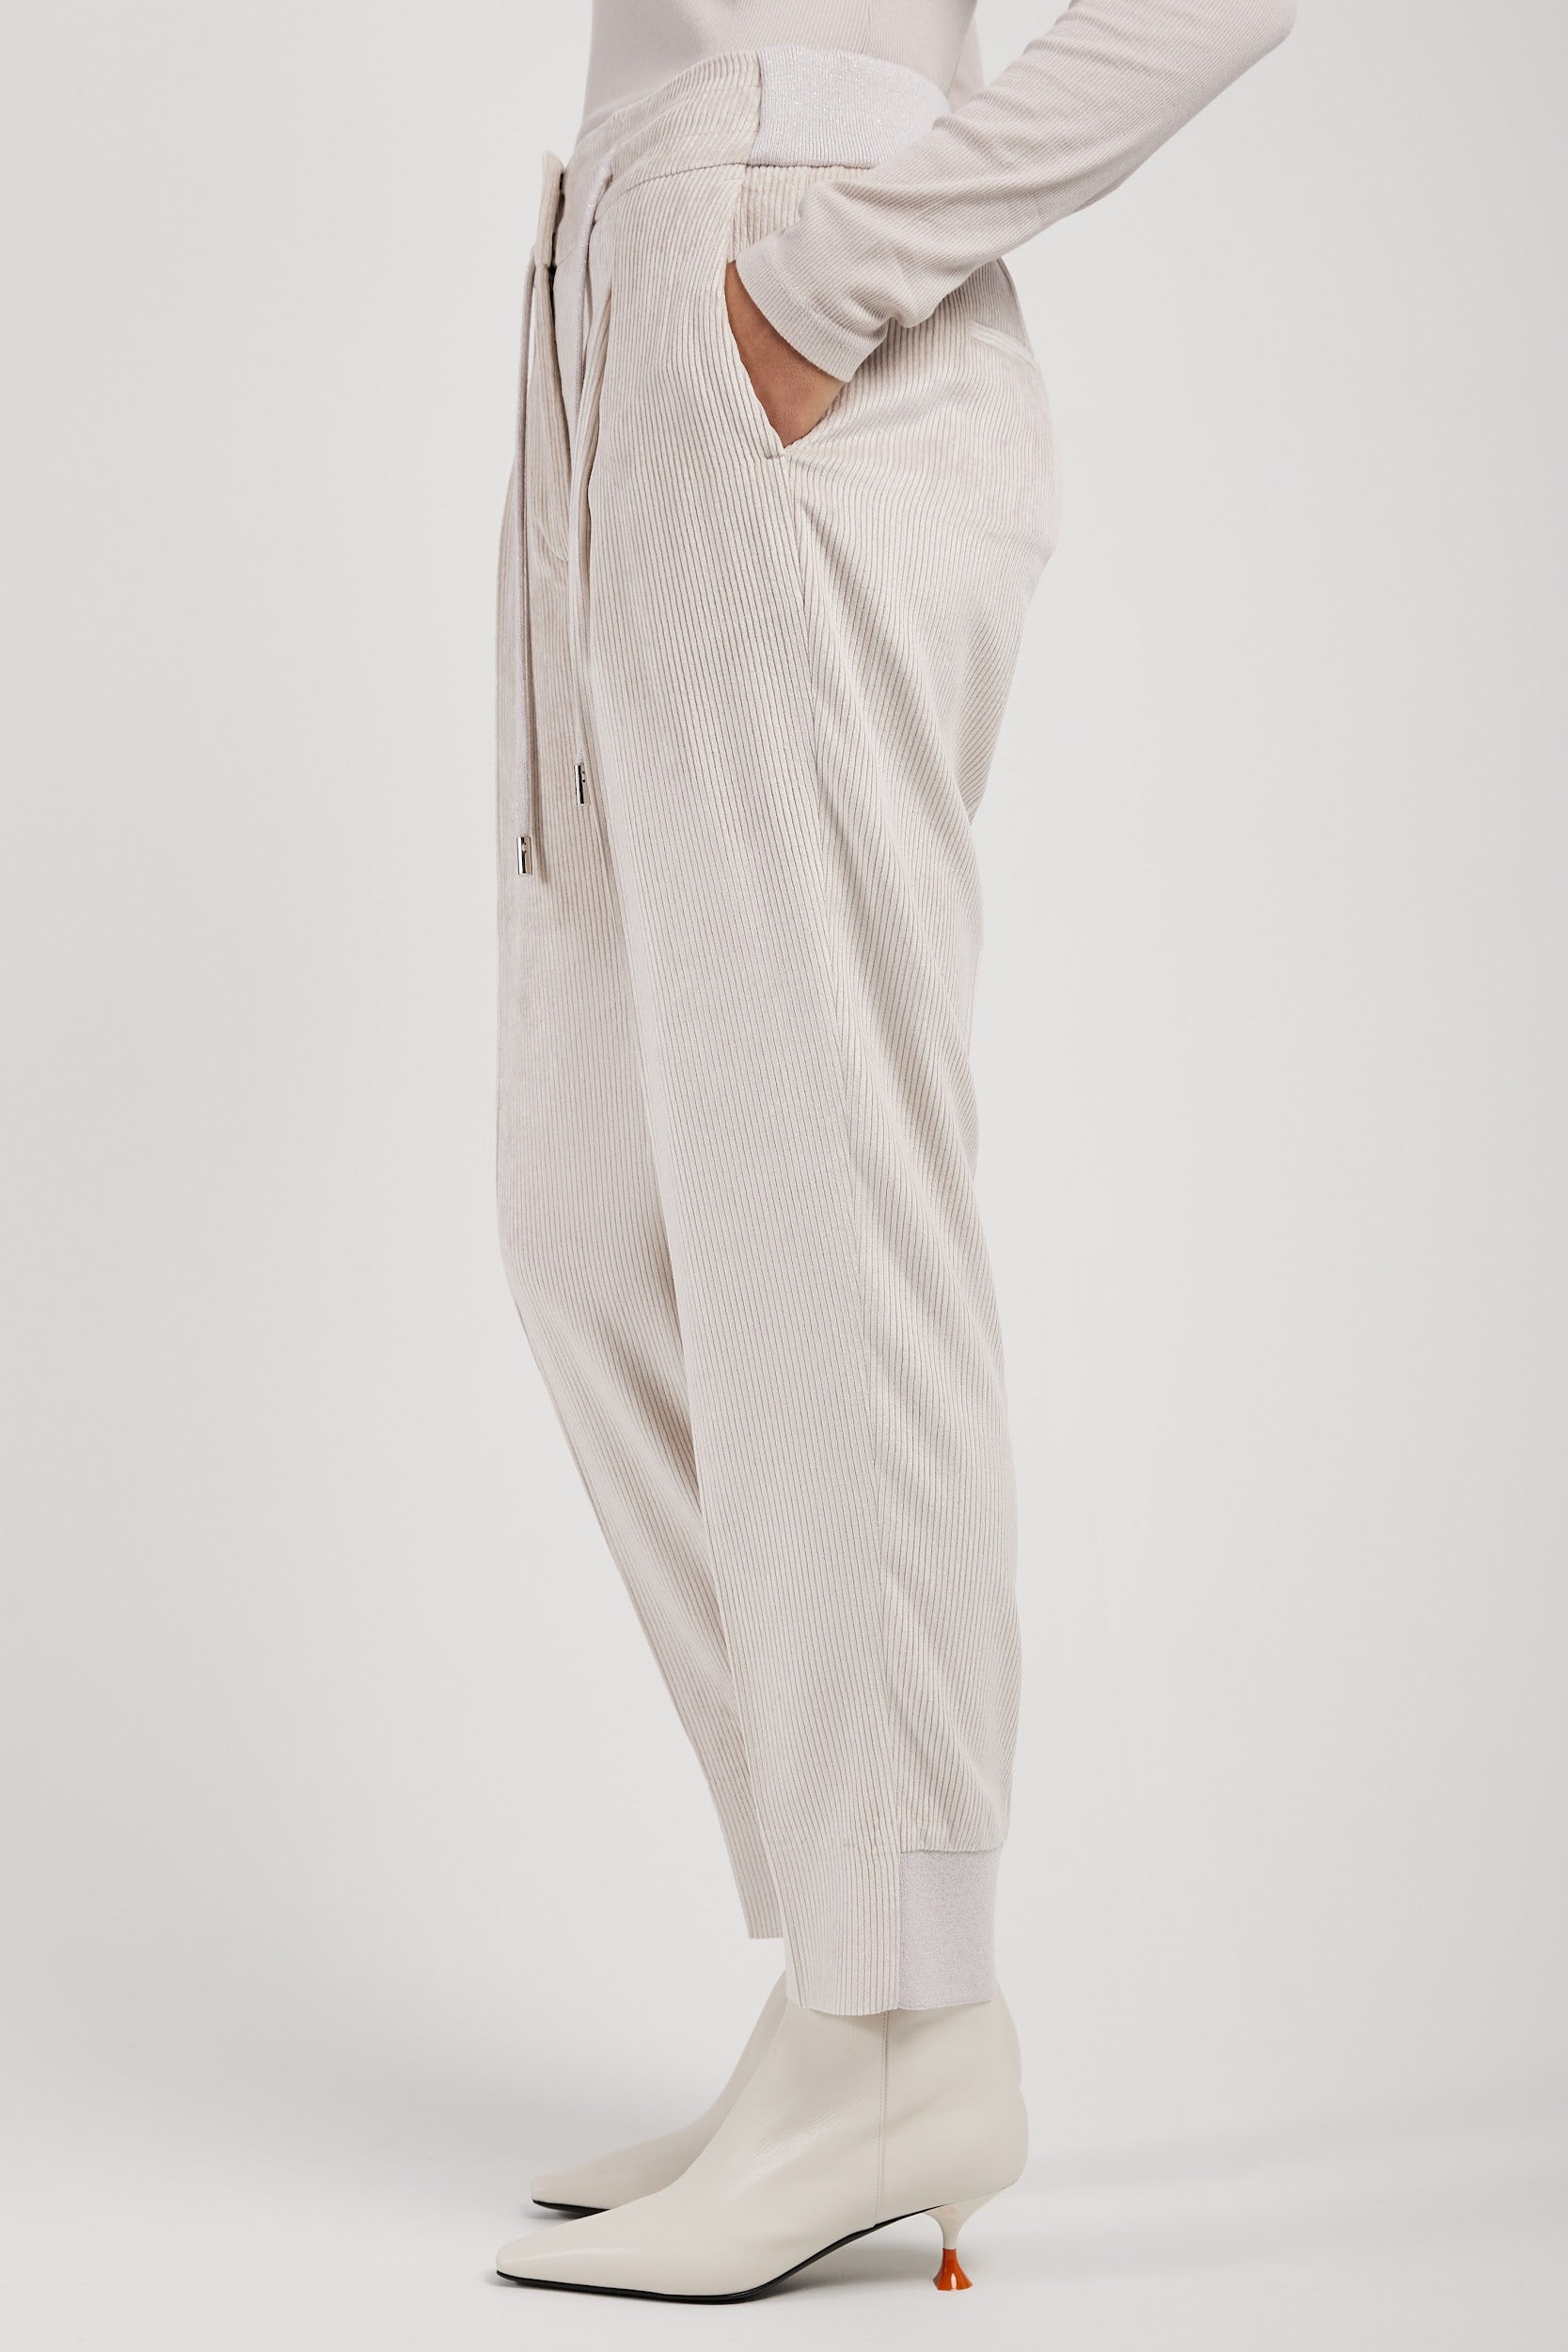 PESERICO Drawstring Corduroy Tricot Pant in Marble Dust